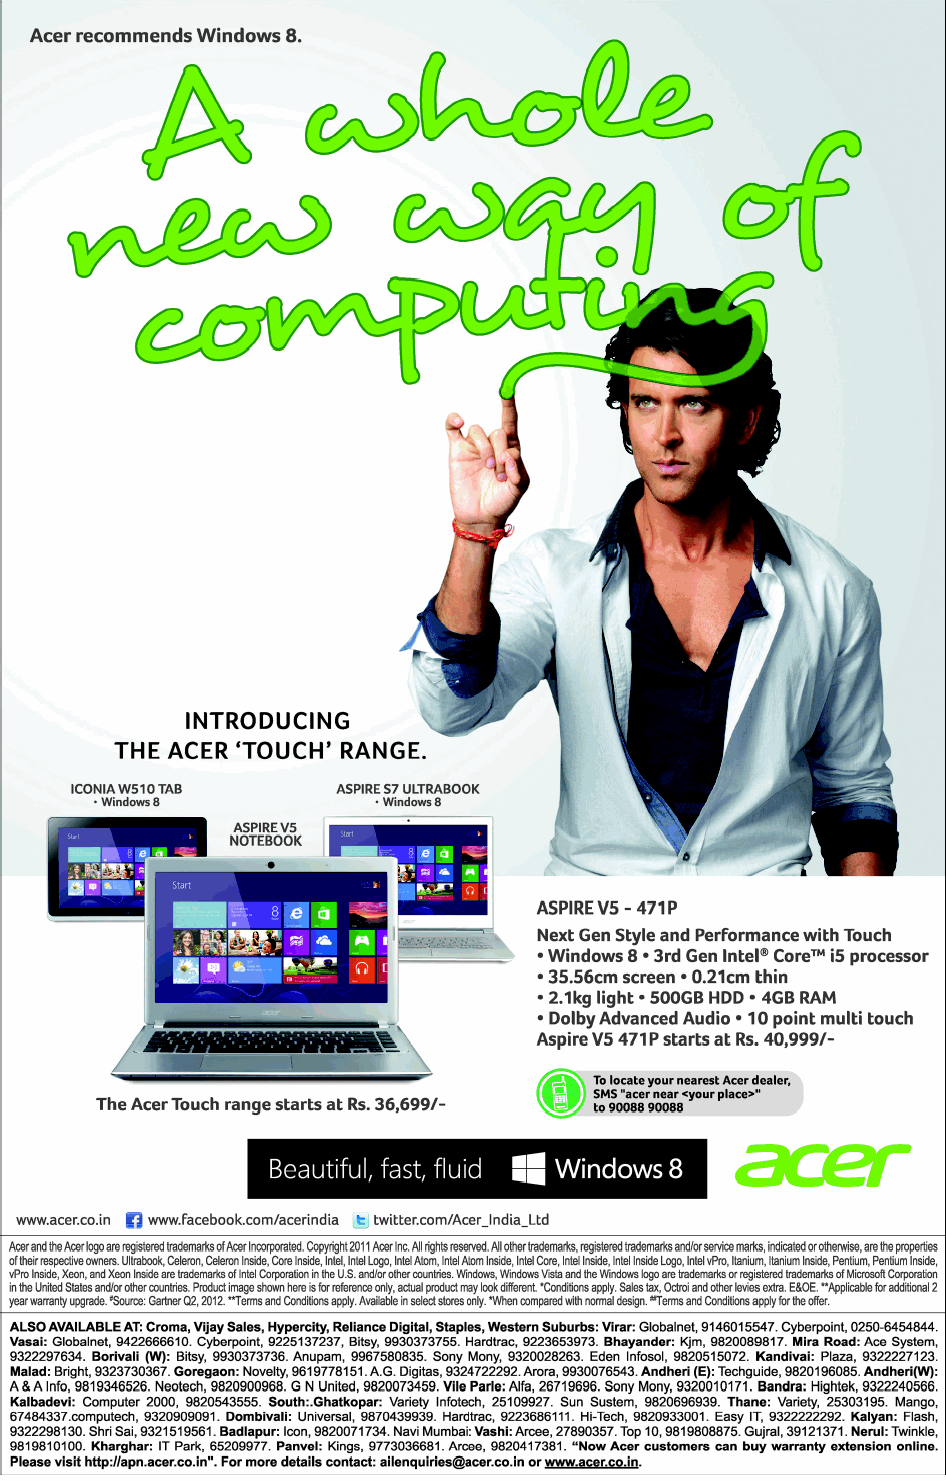 Acer - Touch Range starts from Rs. 36,699/-